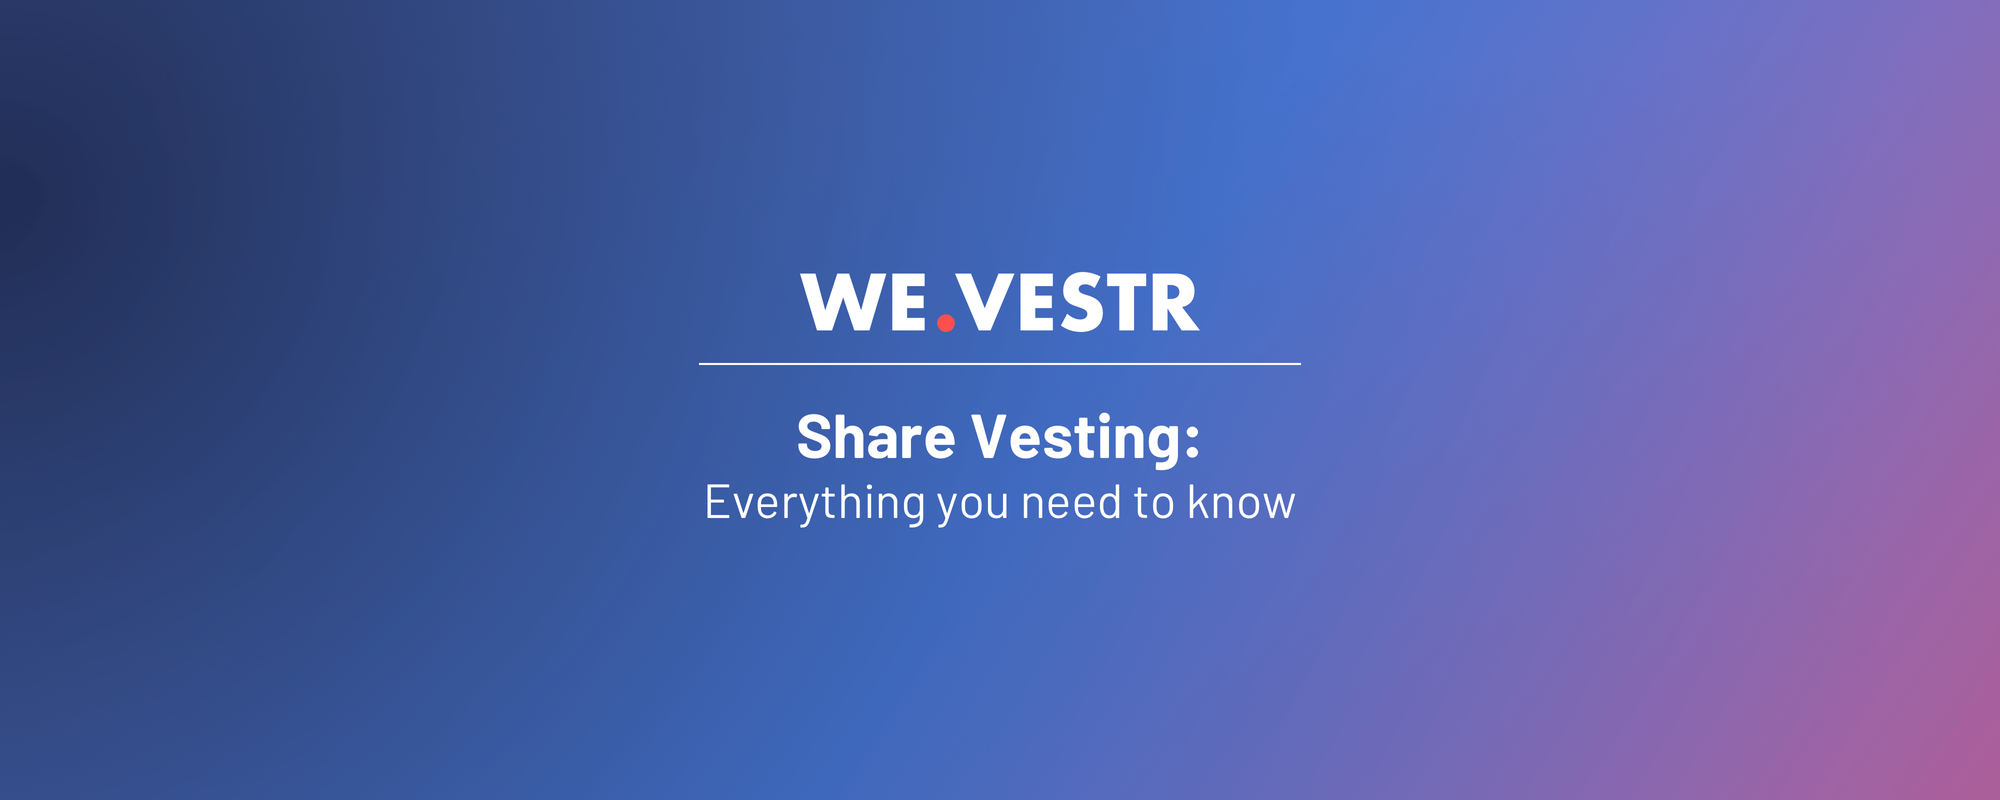 Share vesting: Everything you need to know